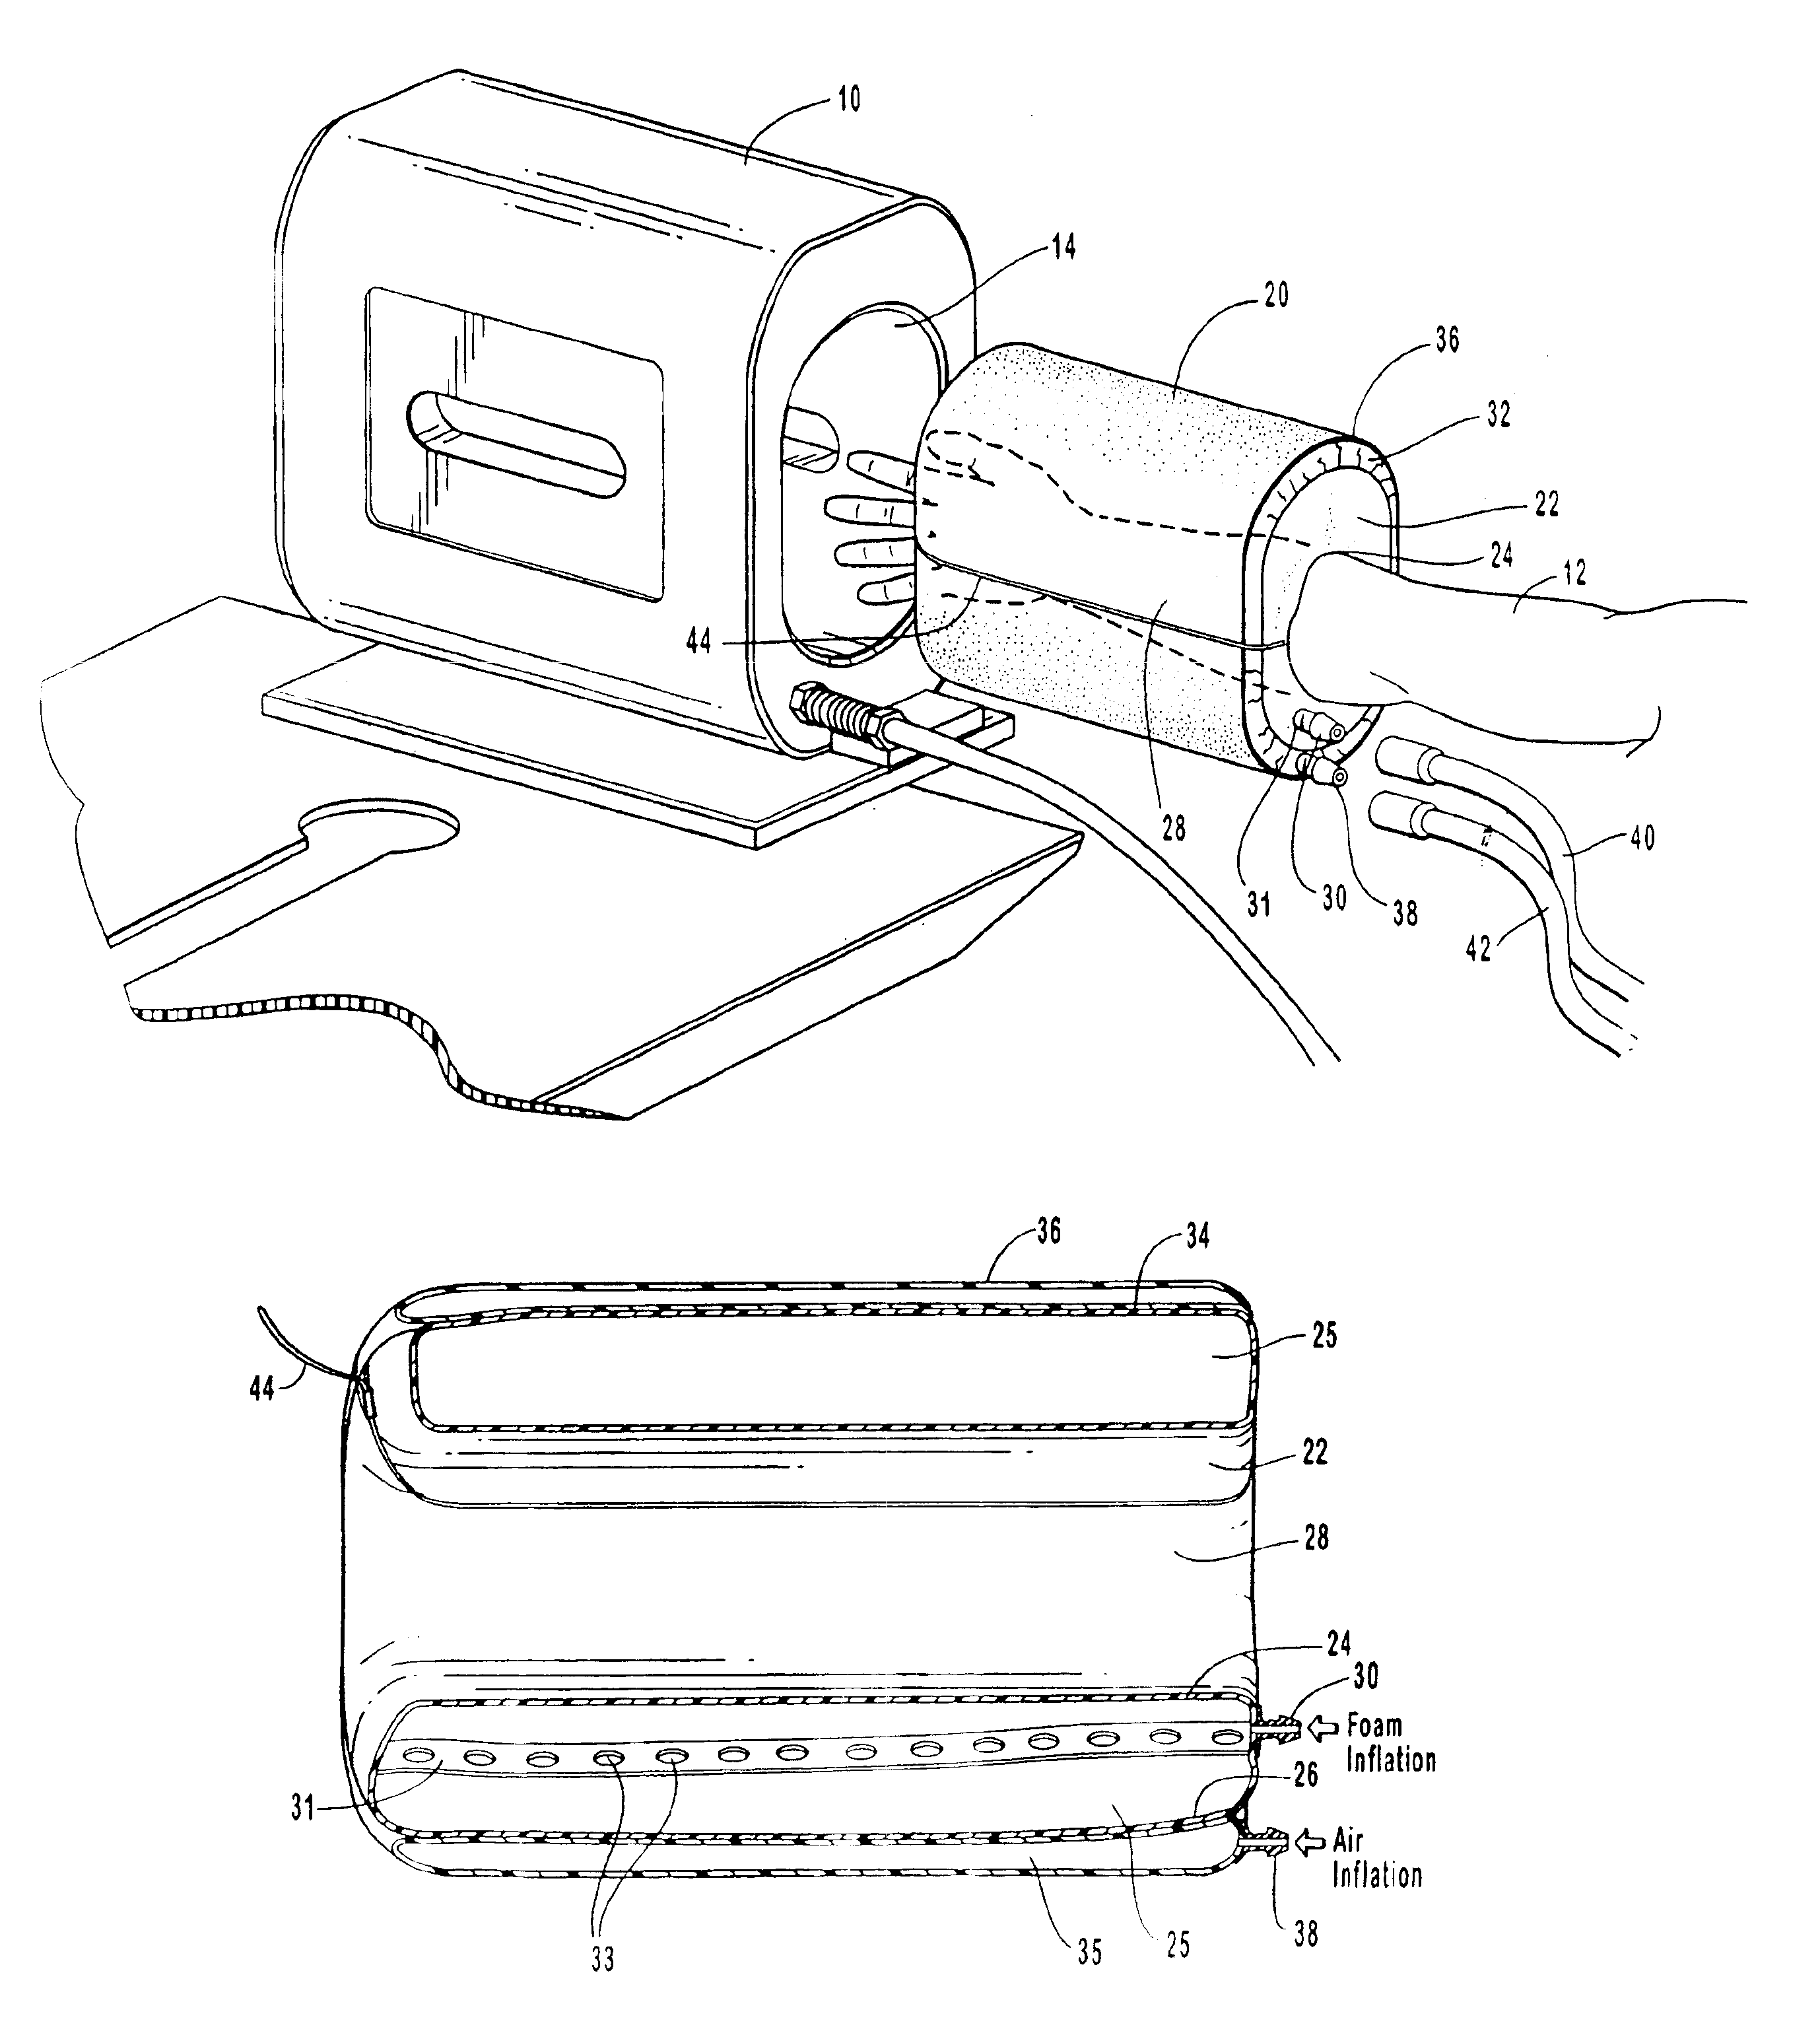 Restraining apparatus and method for use in imaging procedures